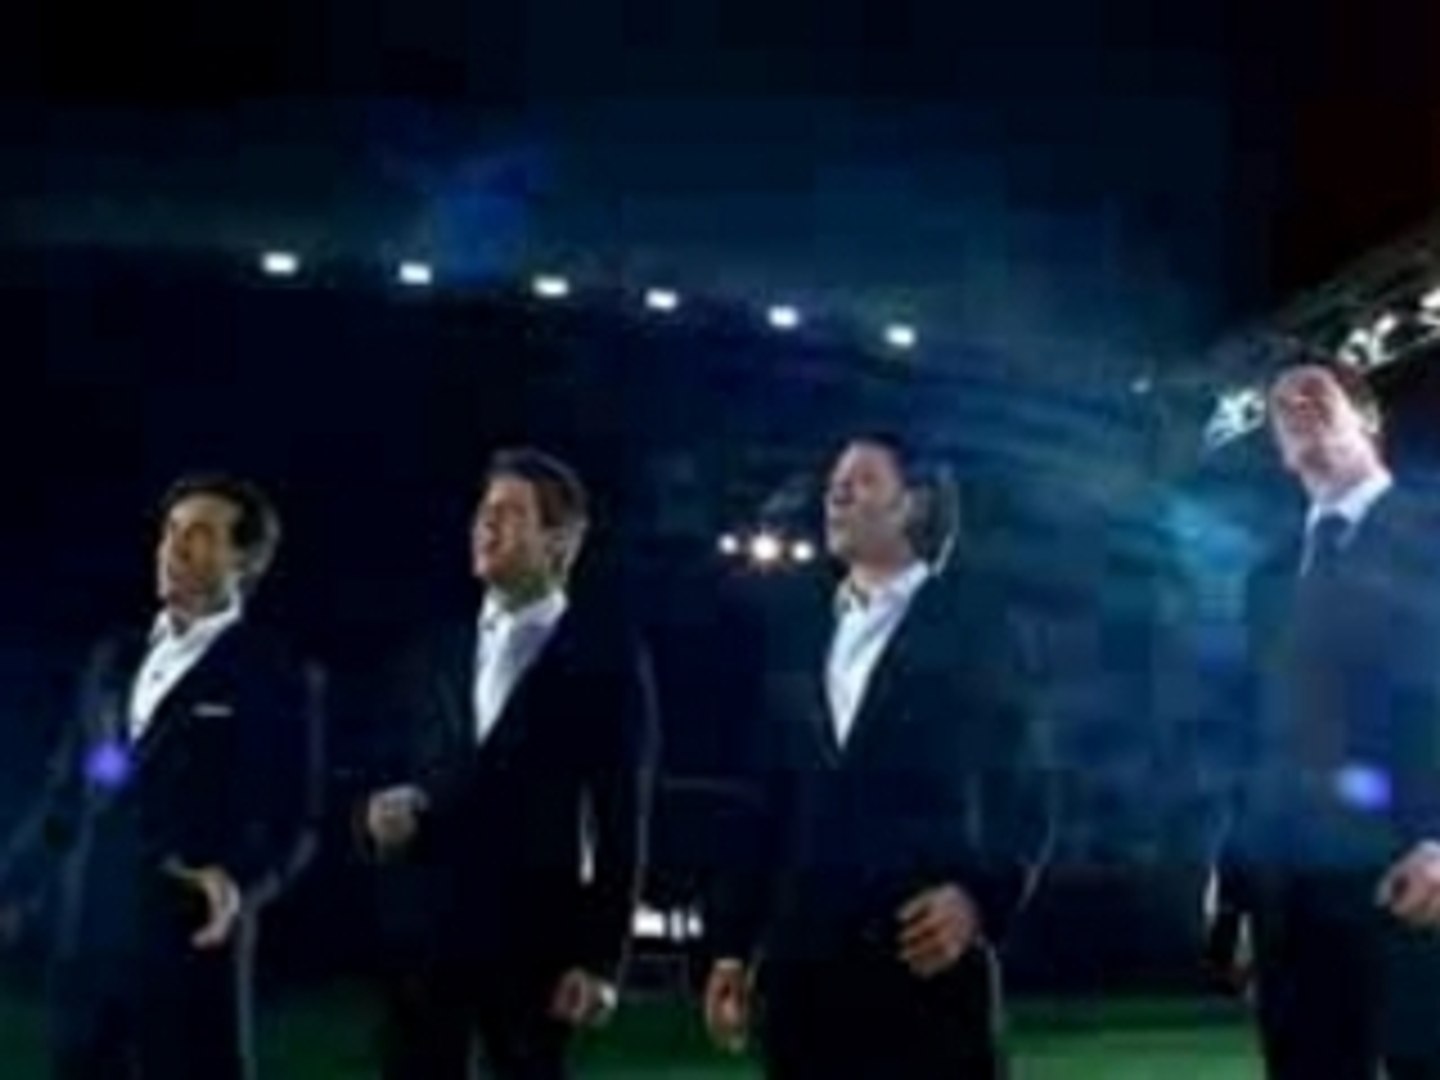 IL Divo-Toni Braxton-The Time Of Our Lives - Vidéo Dailymotion